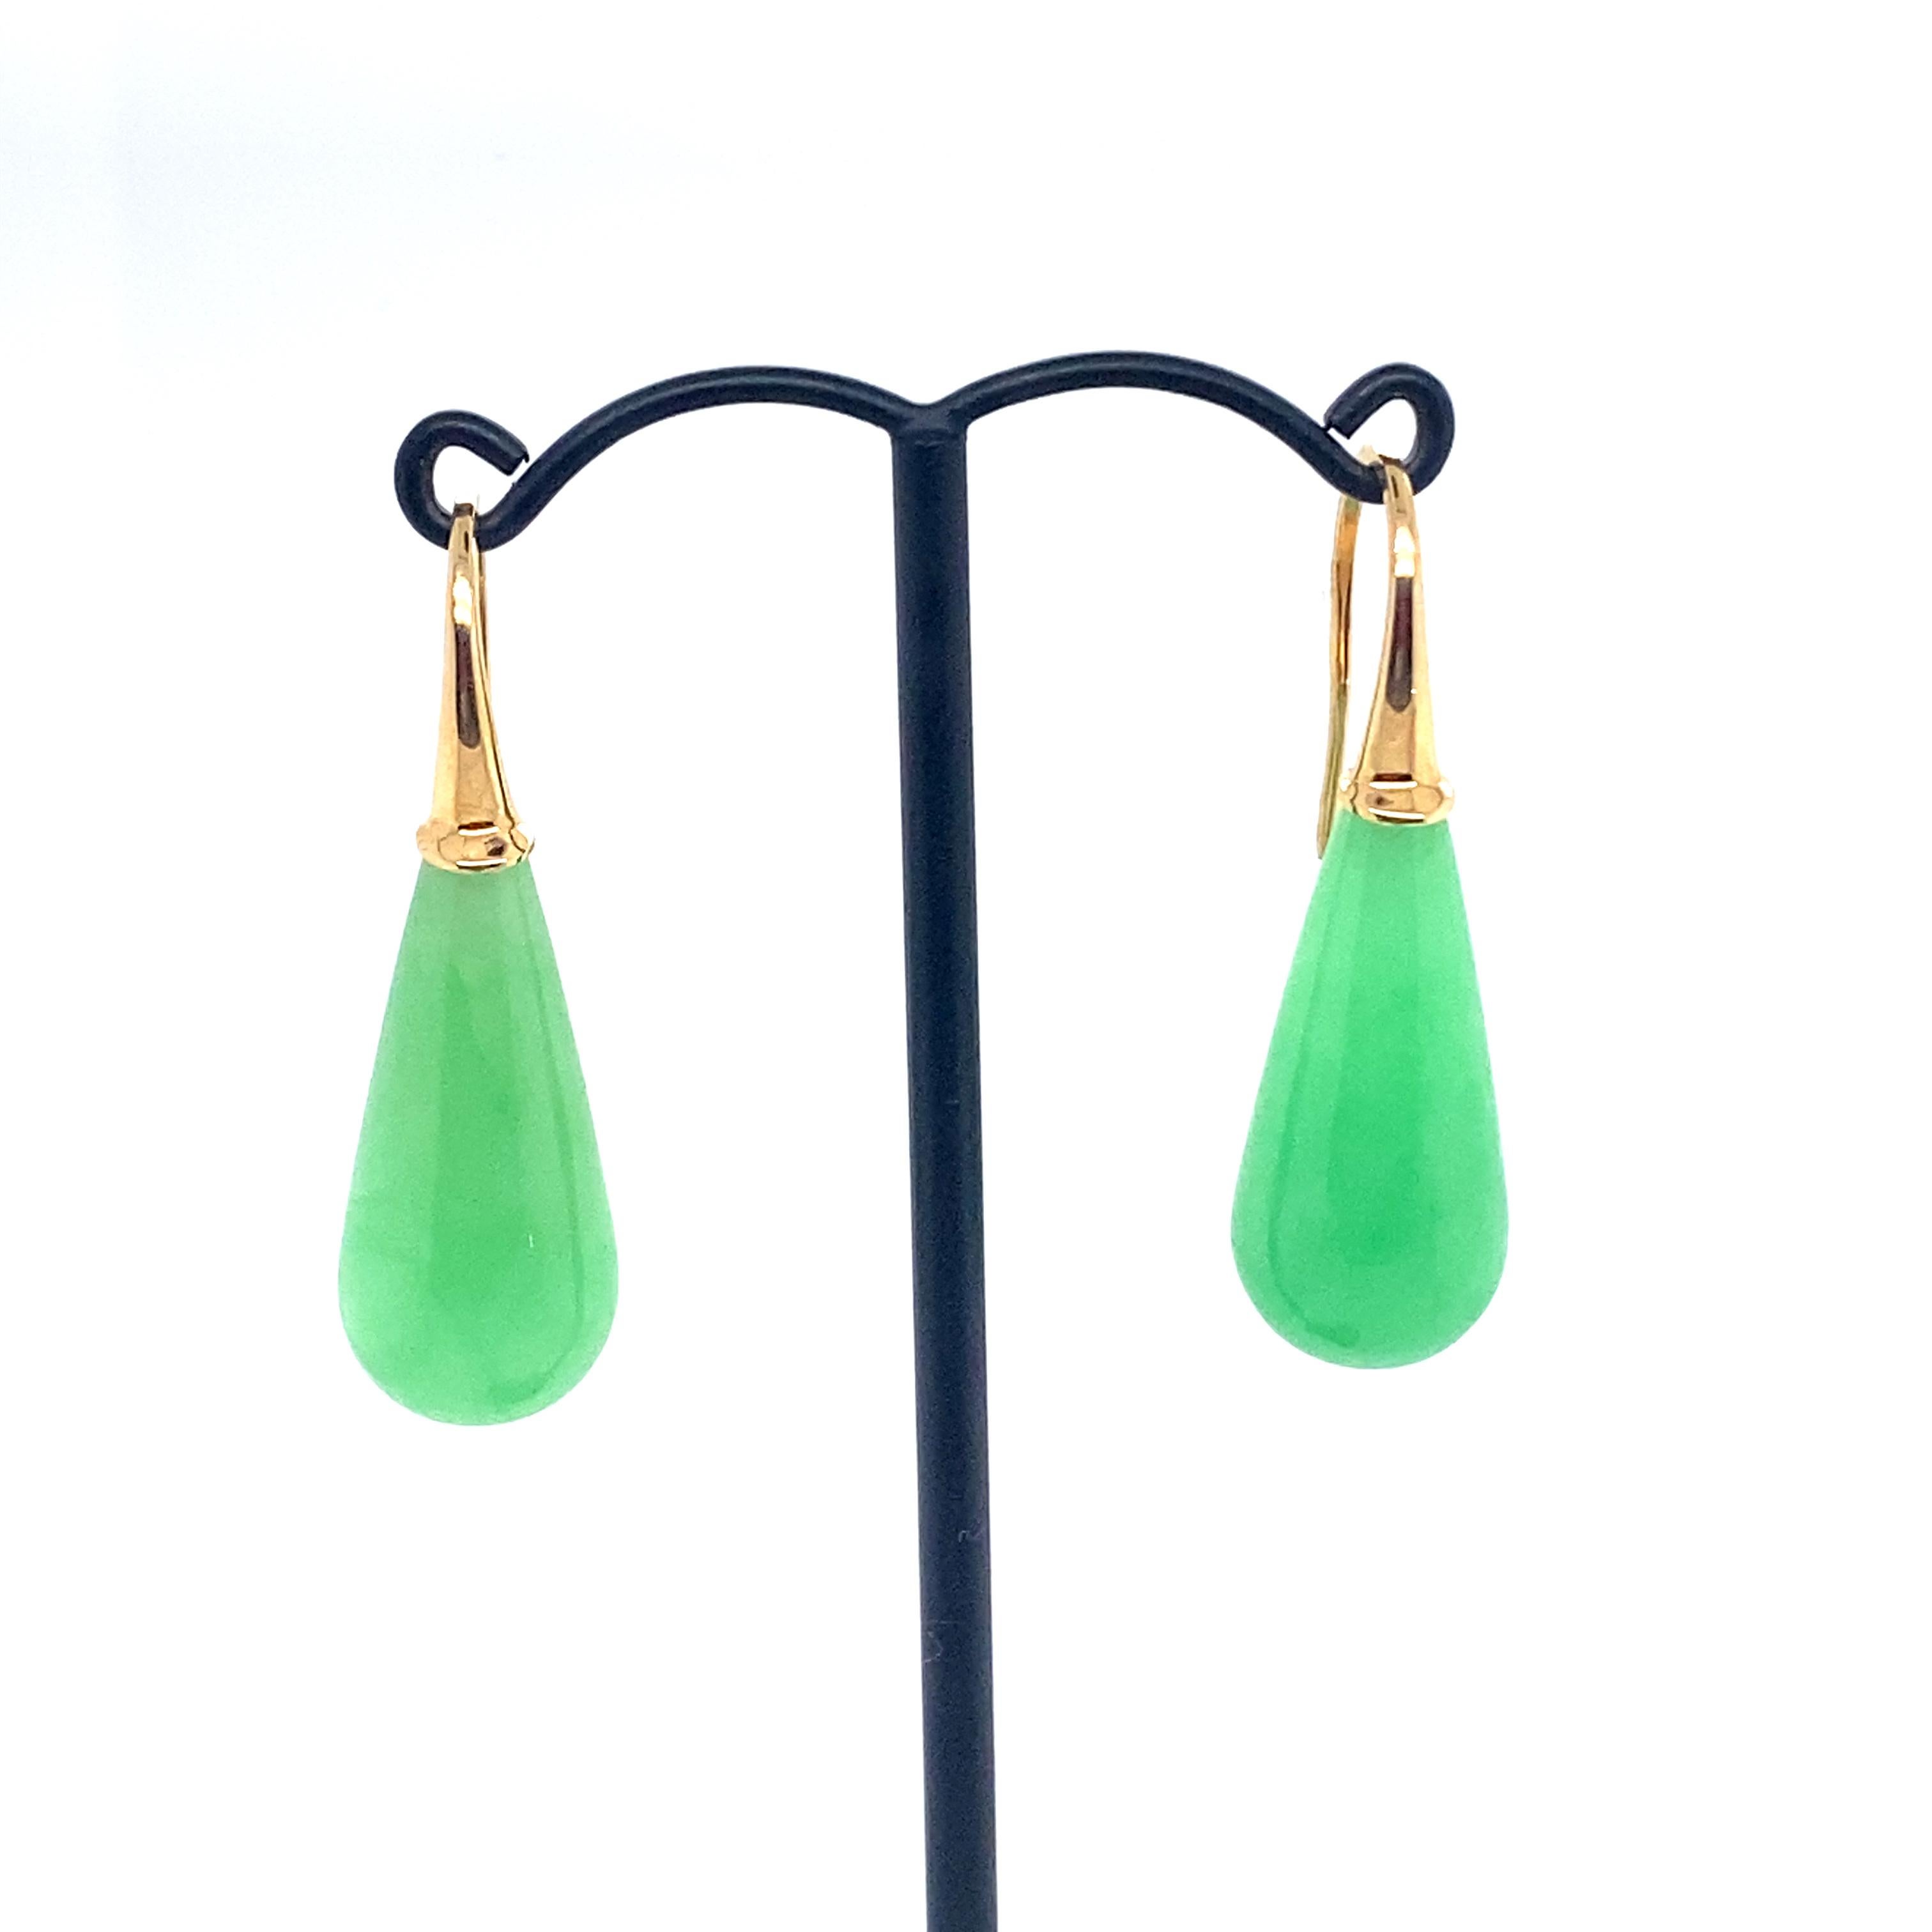 Beautiful and Elegant Yellow Gold and Jade Earrings.
Yellow Gold 18 Carat
Natural Jade

Go to our showcase page for more updates and click on the 